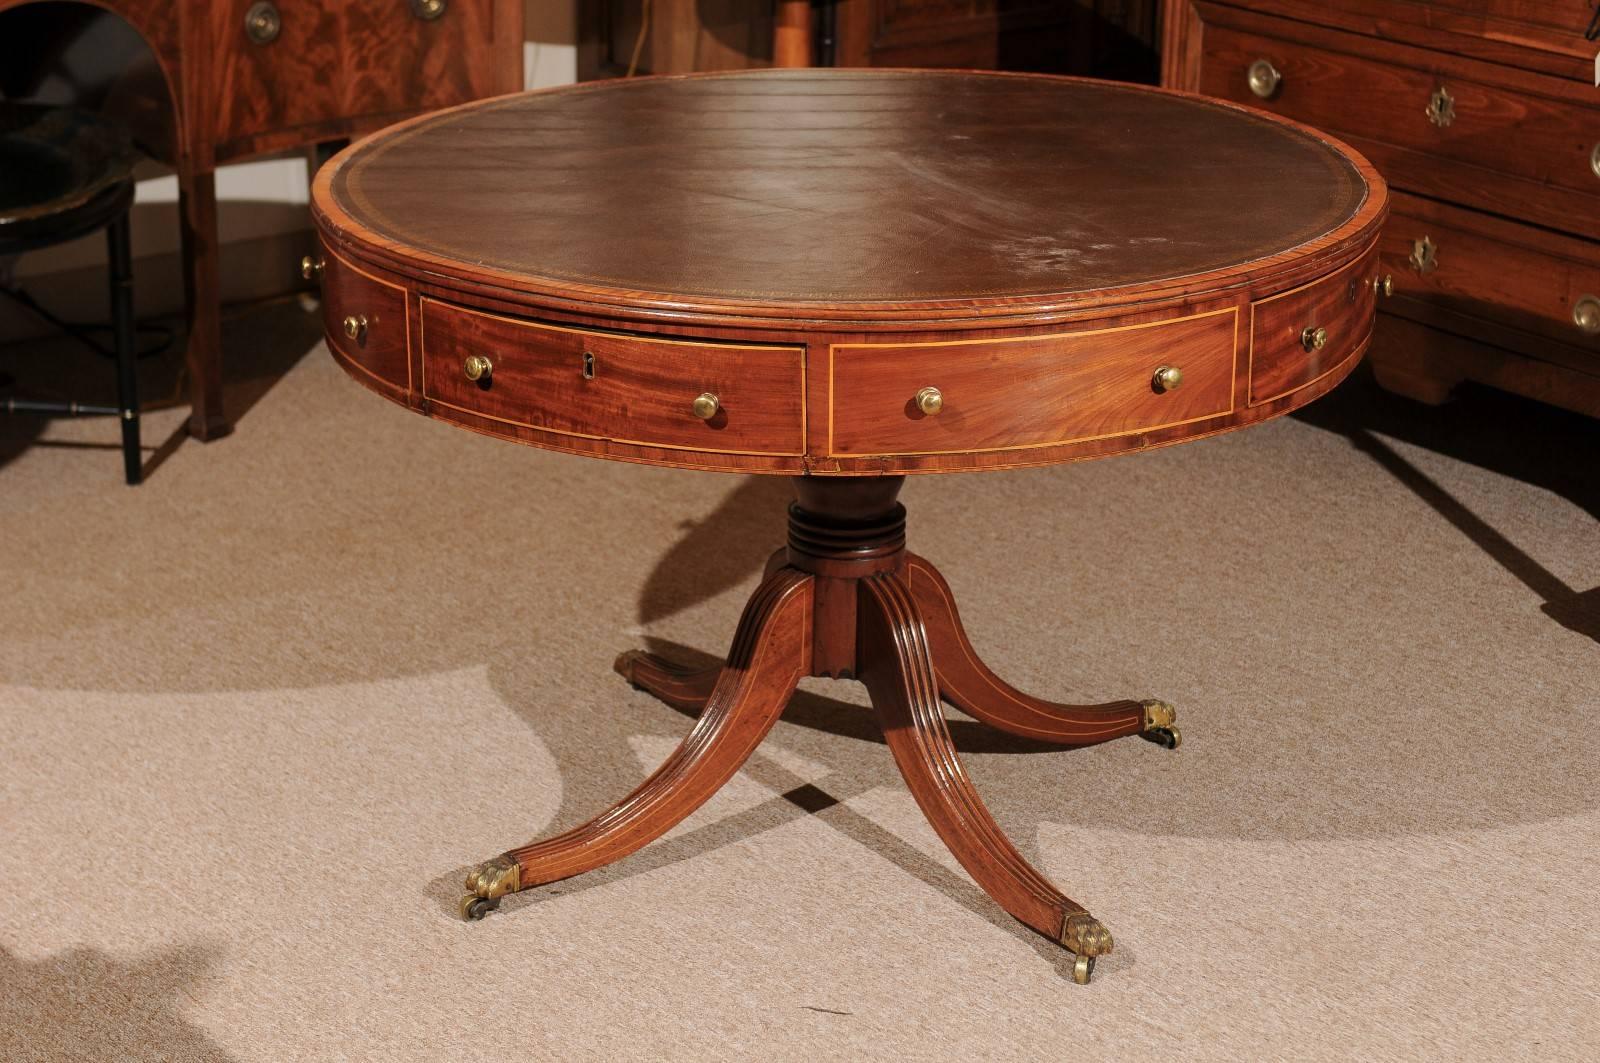 English Revolving 19th century rent table in mahogany and satin wood with brown embossed leather top, string inlay, four drawers, splayed reeded legs and brass paw castors. 

William Word Fine Antiques: Atlanta's source for antique interiors since